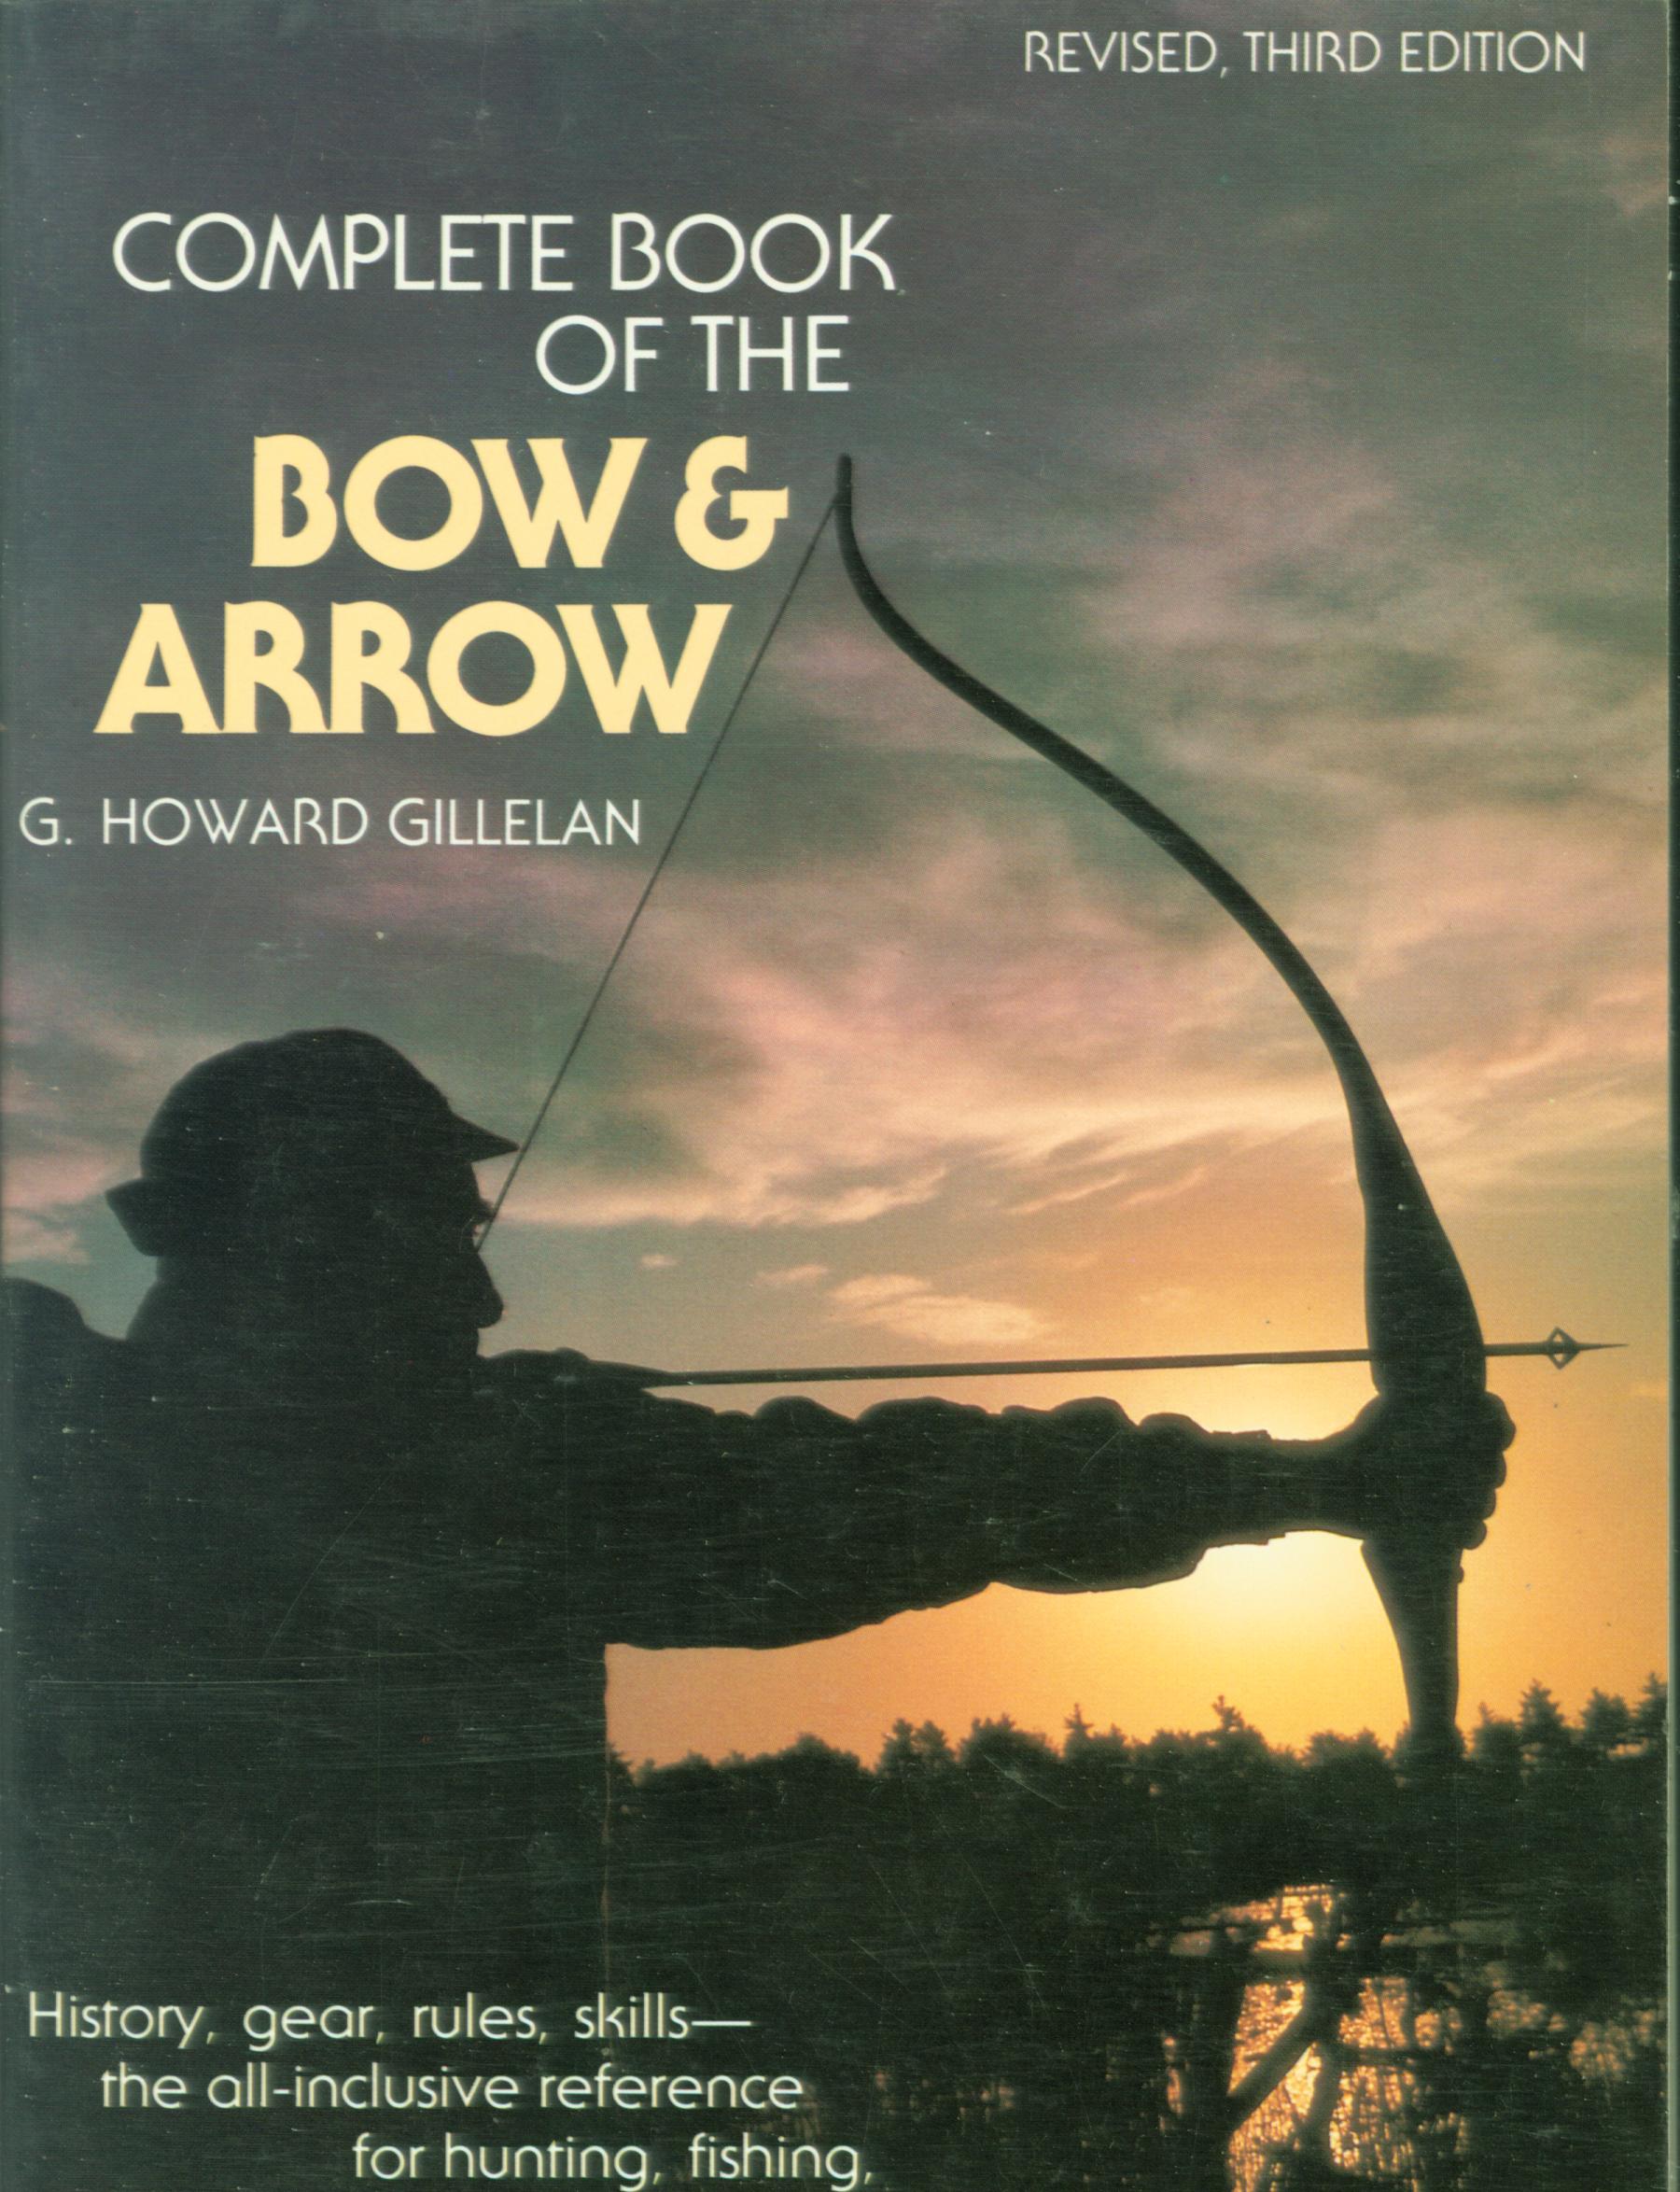 COMPLETE BOOK OF THE BOW & ARROW. 